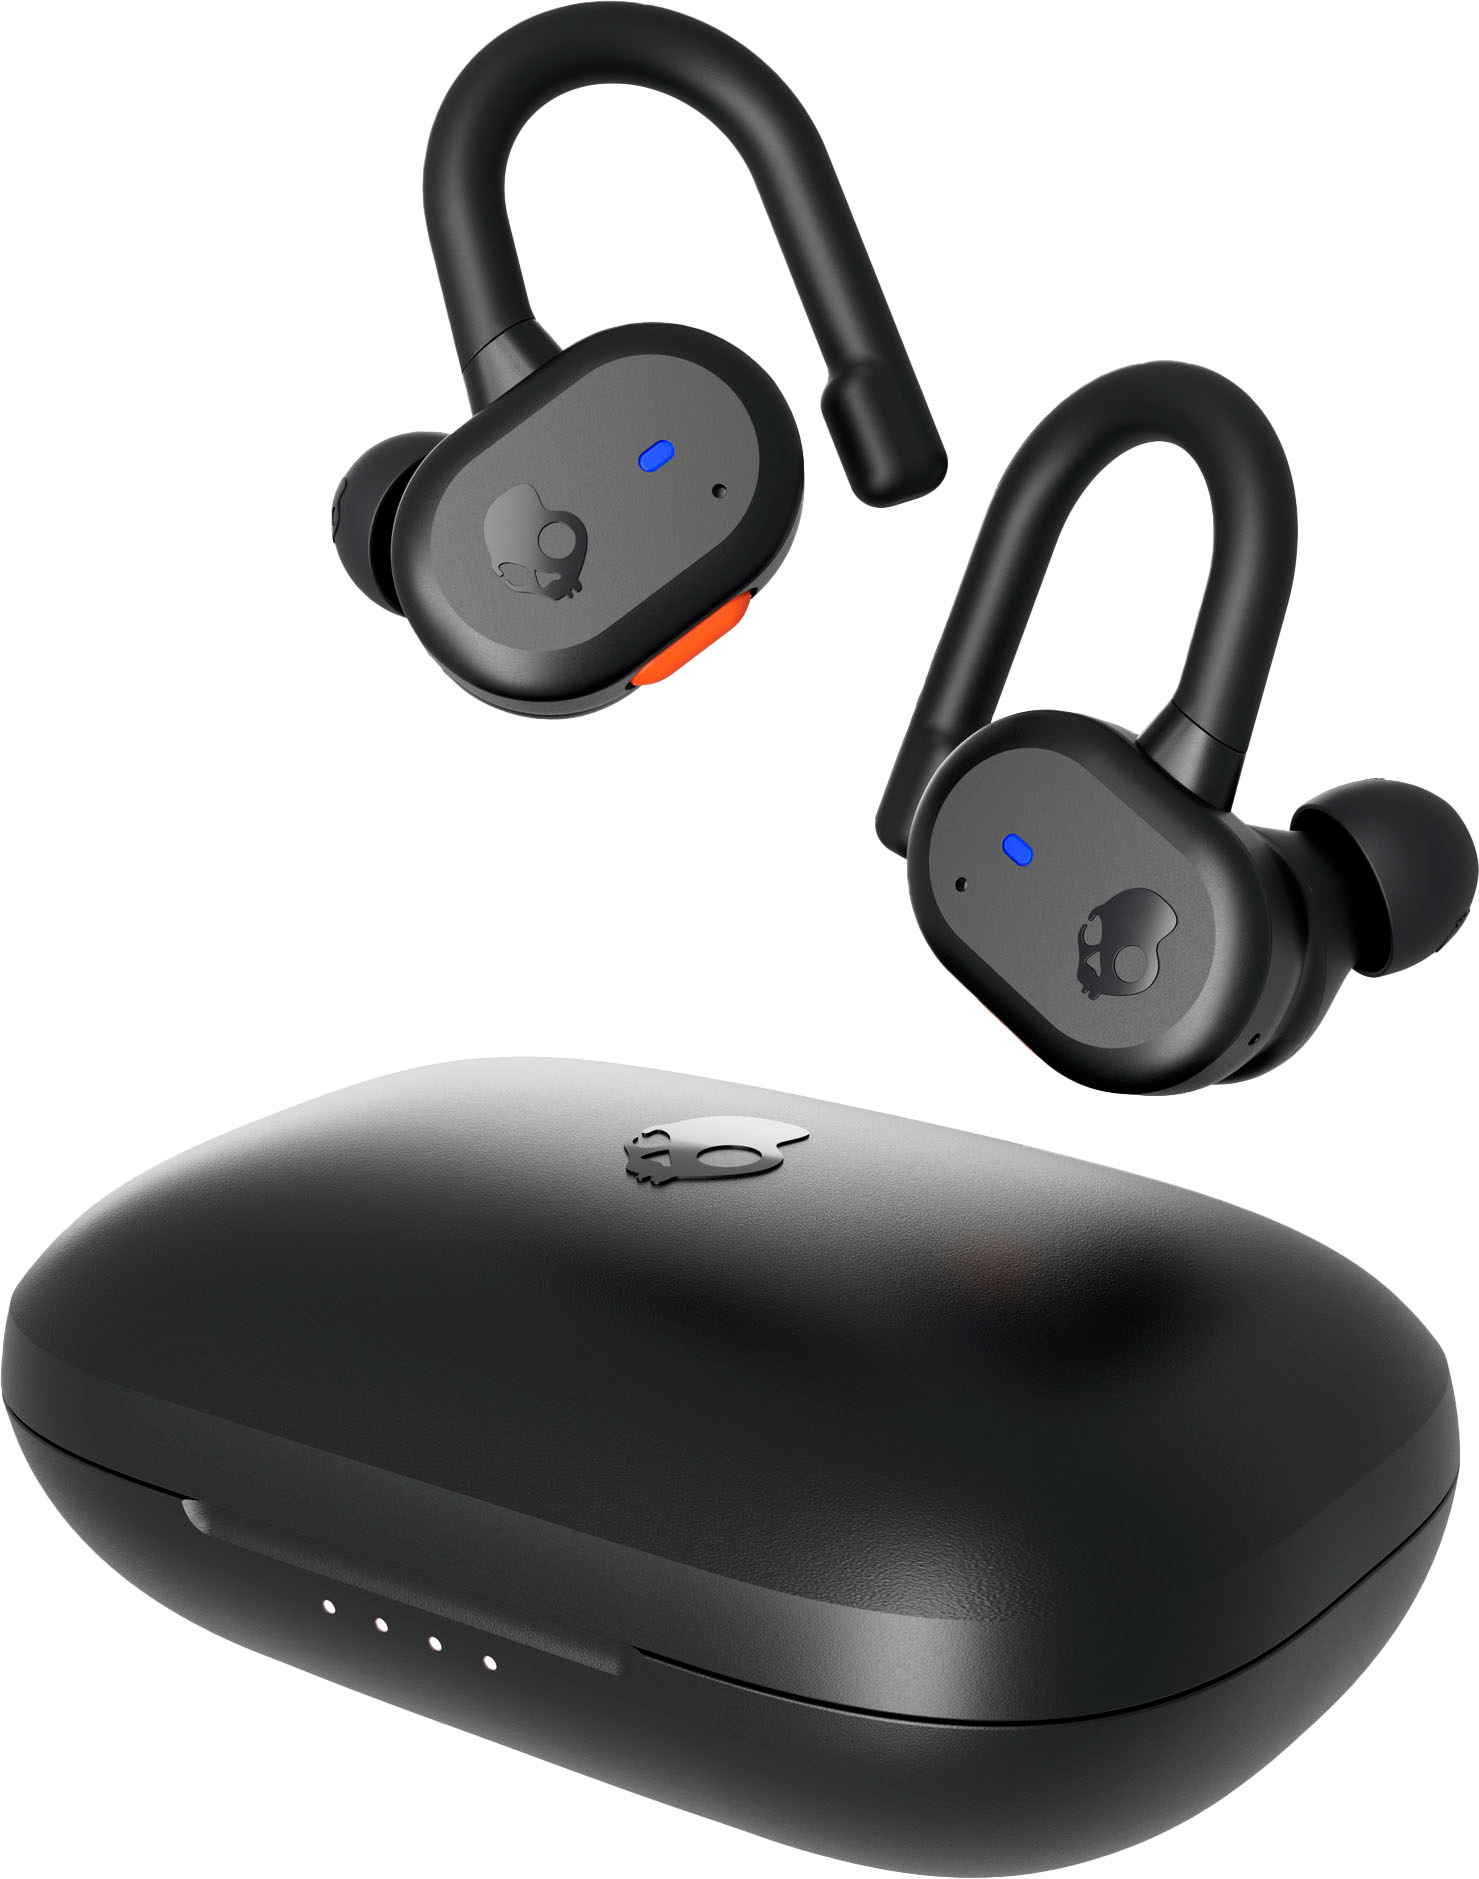 Angle View: Skullcandy - Push Active True Wireless Sport Earbuds - Black